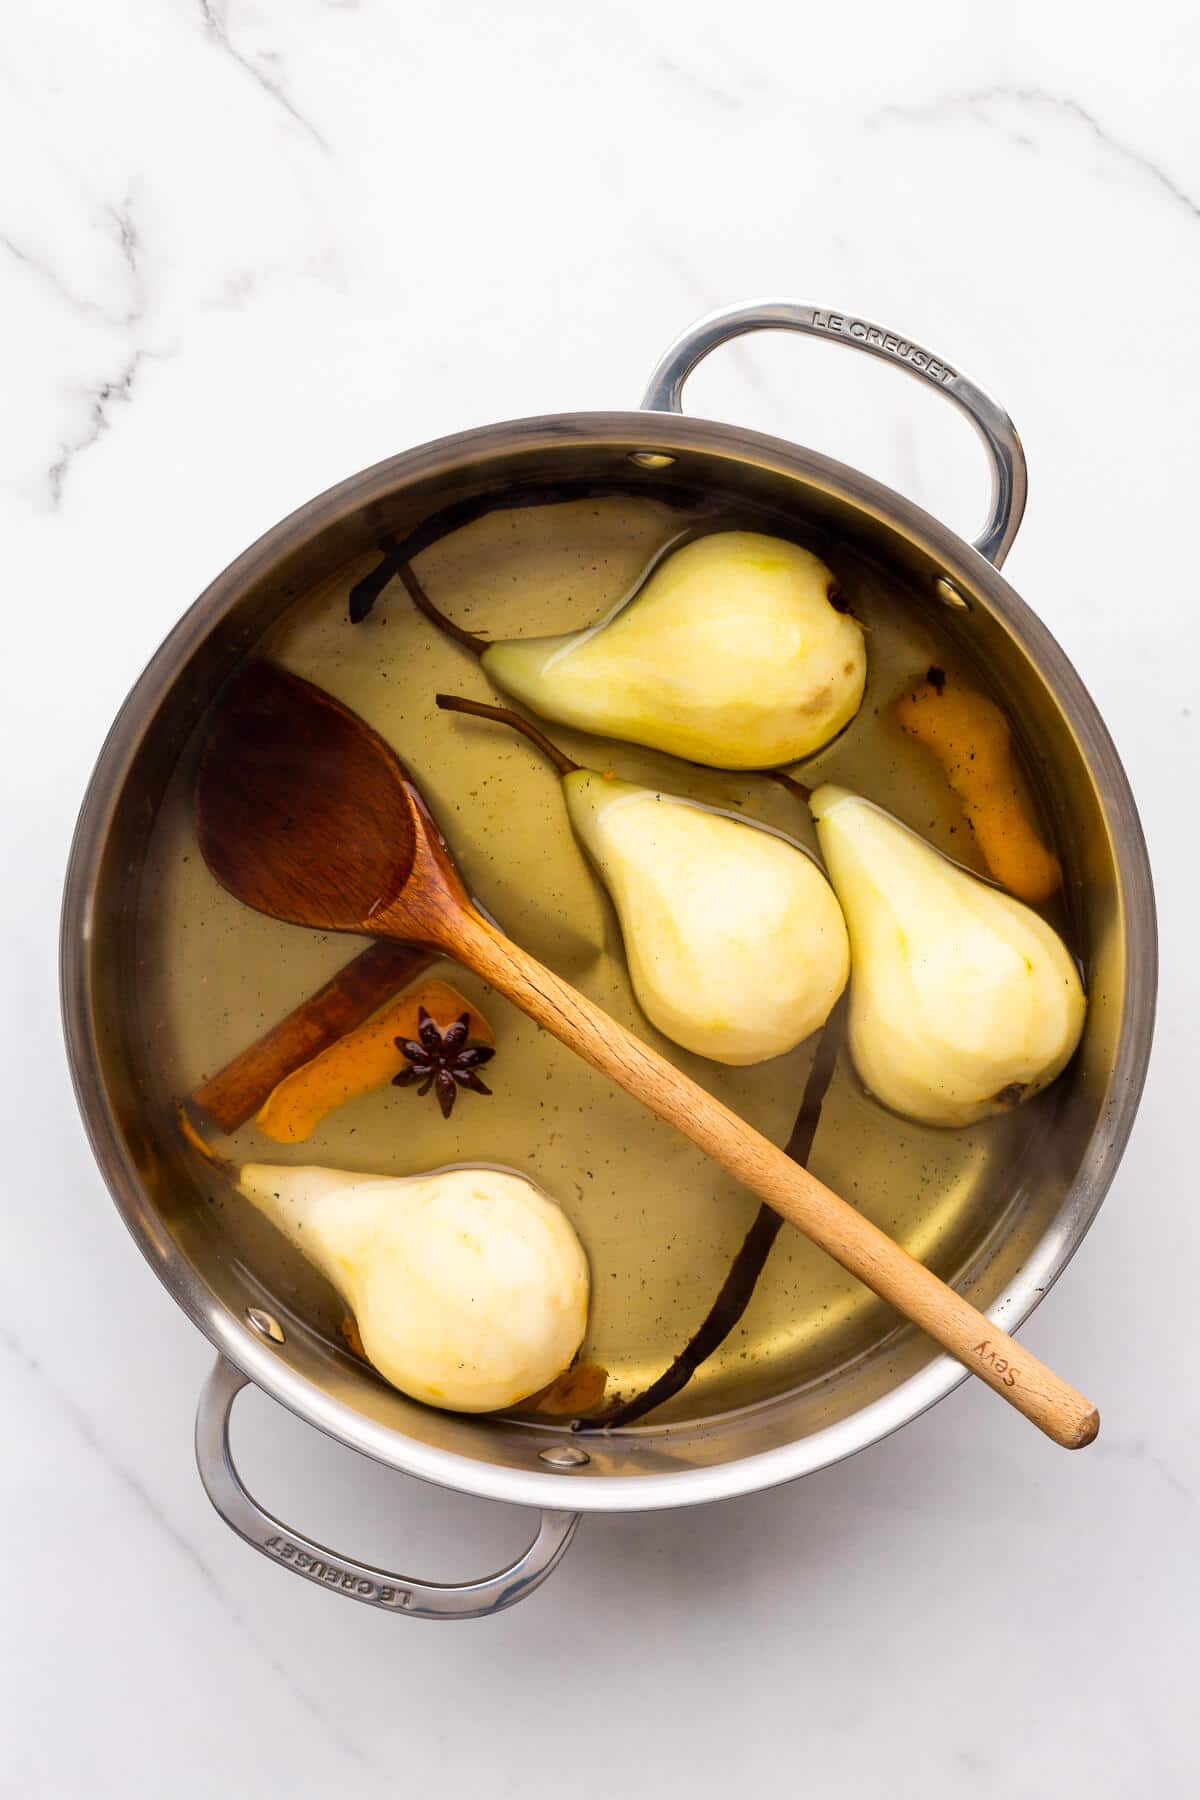 Peeled whole pears in a pot with syrup, spices, and orange peel, ready for poaching on the stove.